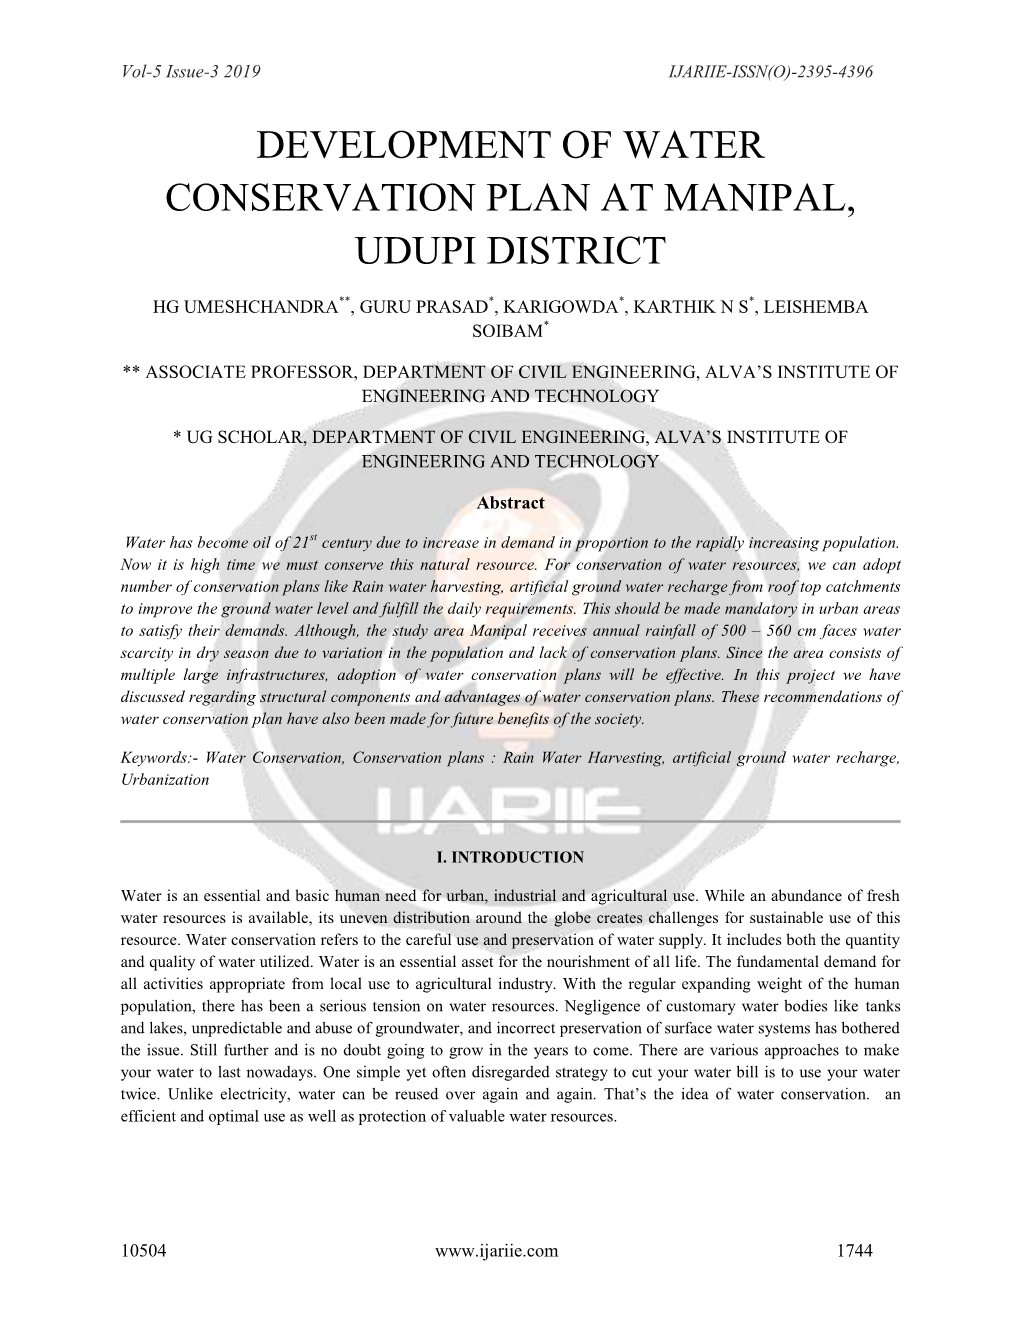 Development of Water Conservation Plan at Manipal, Udupi District